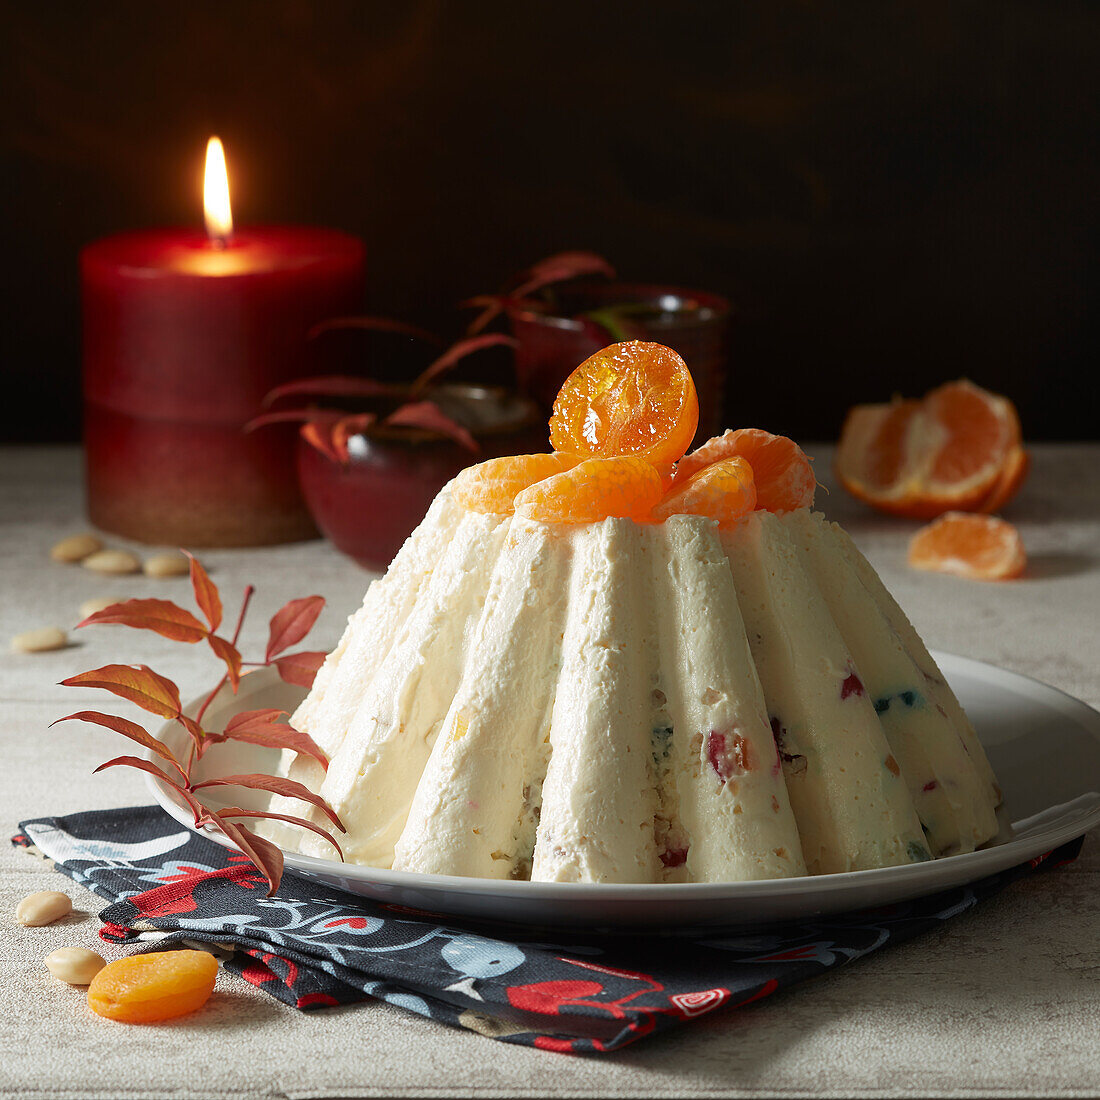 Candied clementine Pashka